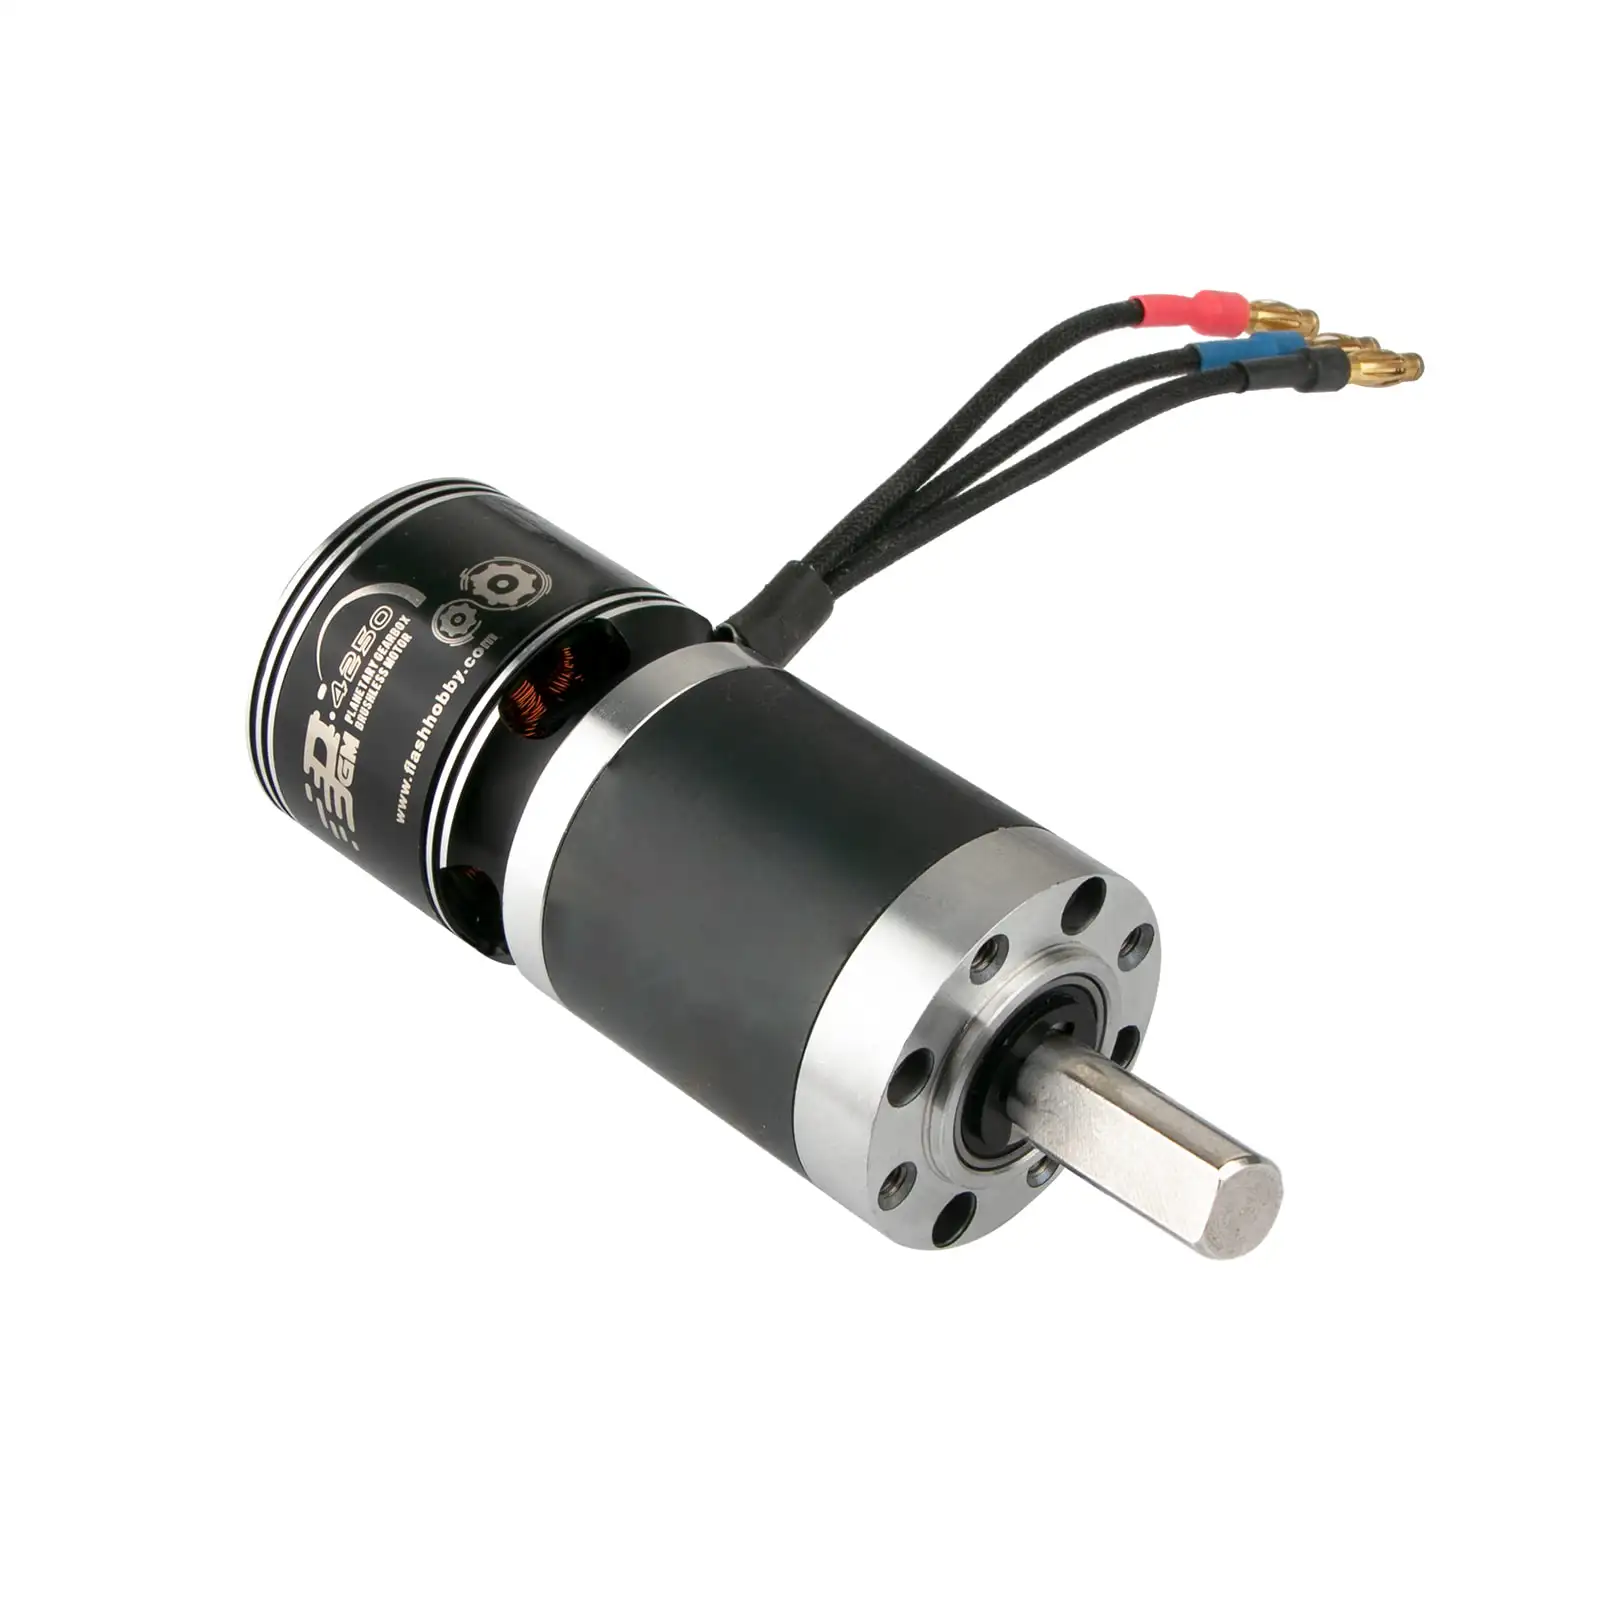 FLASH HOBBY PGM4250-19 Planetary Gearbox Motor High Torque DC Gear Motor Brushless Motors for robots